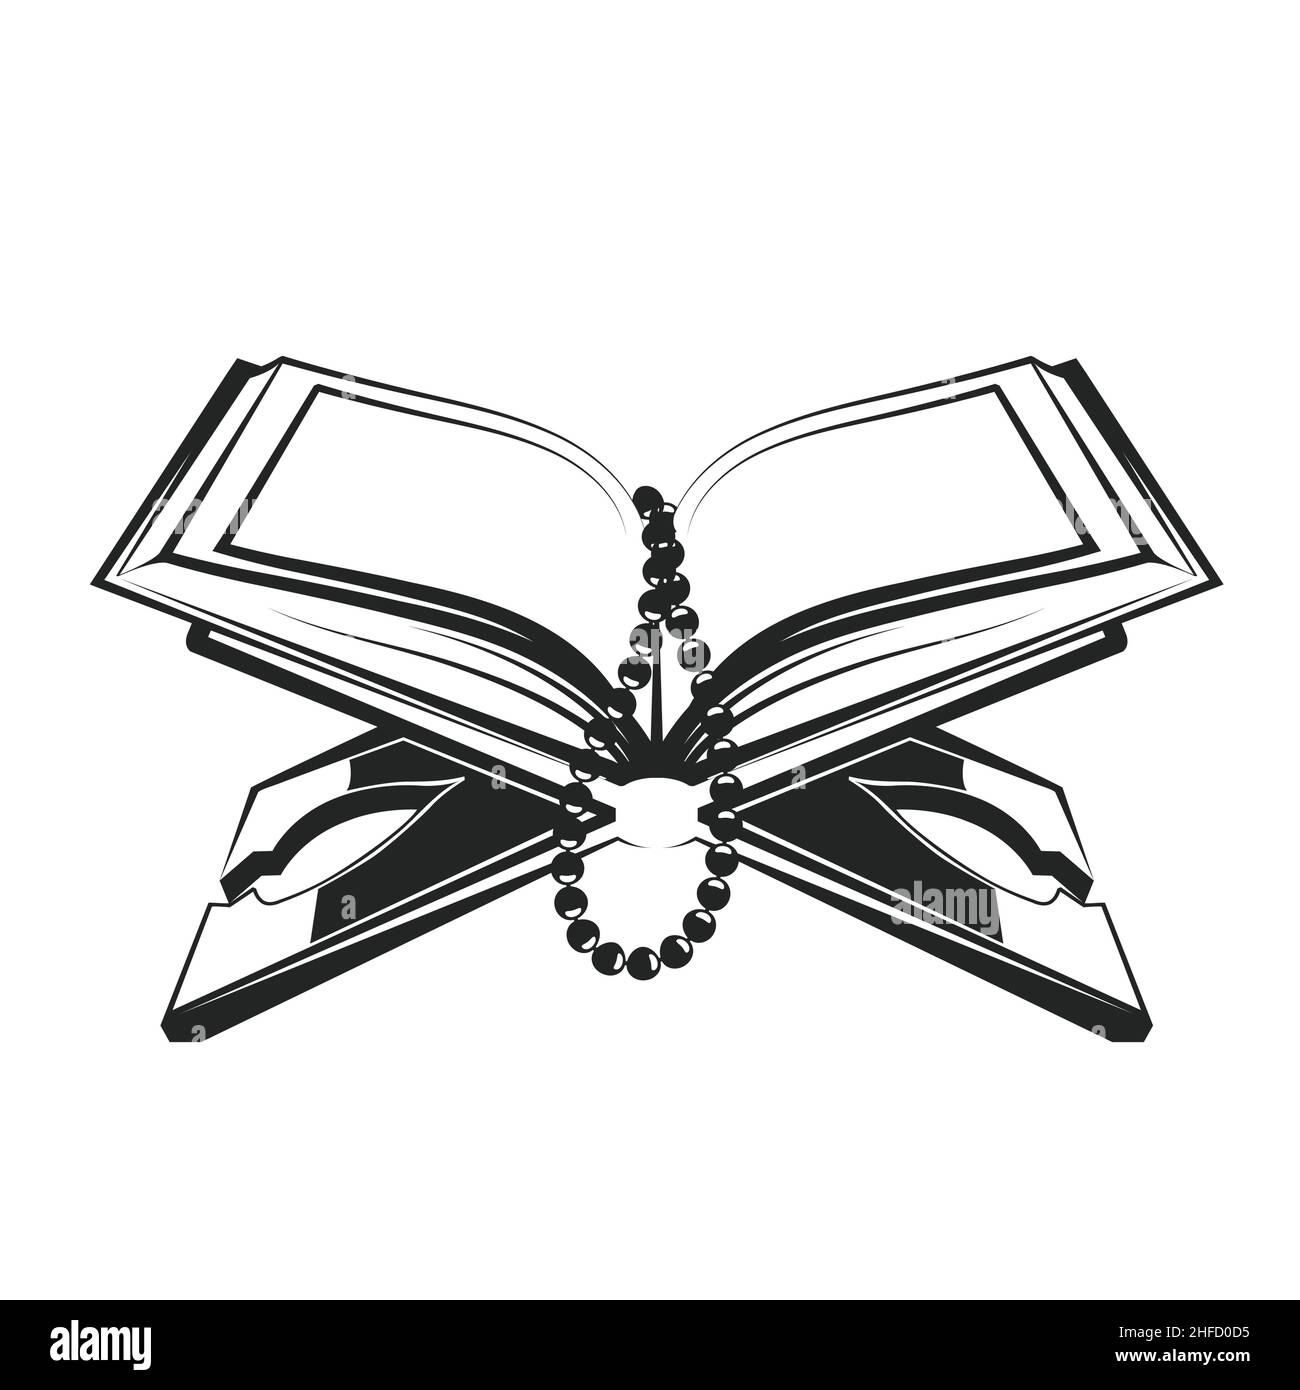 quran clipart black and white